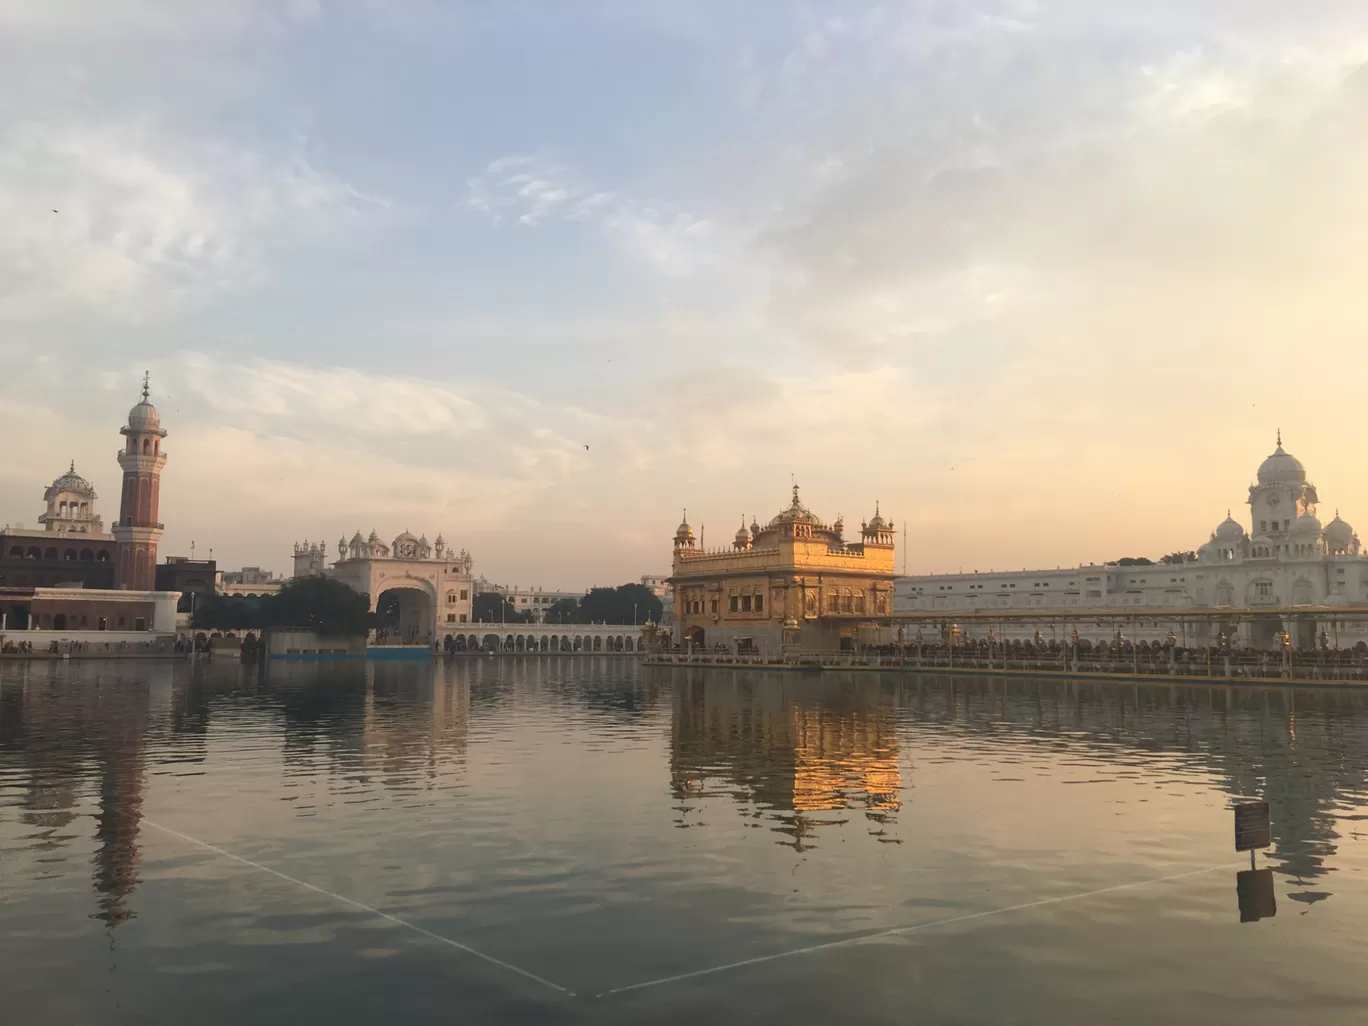 Photo of Golden Temple By rahul rohira